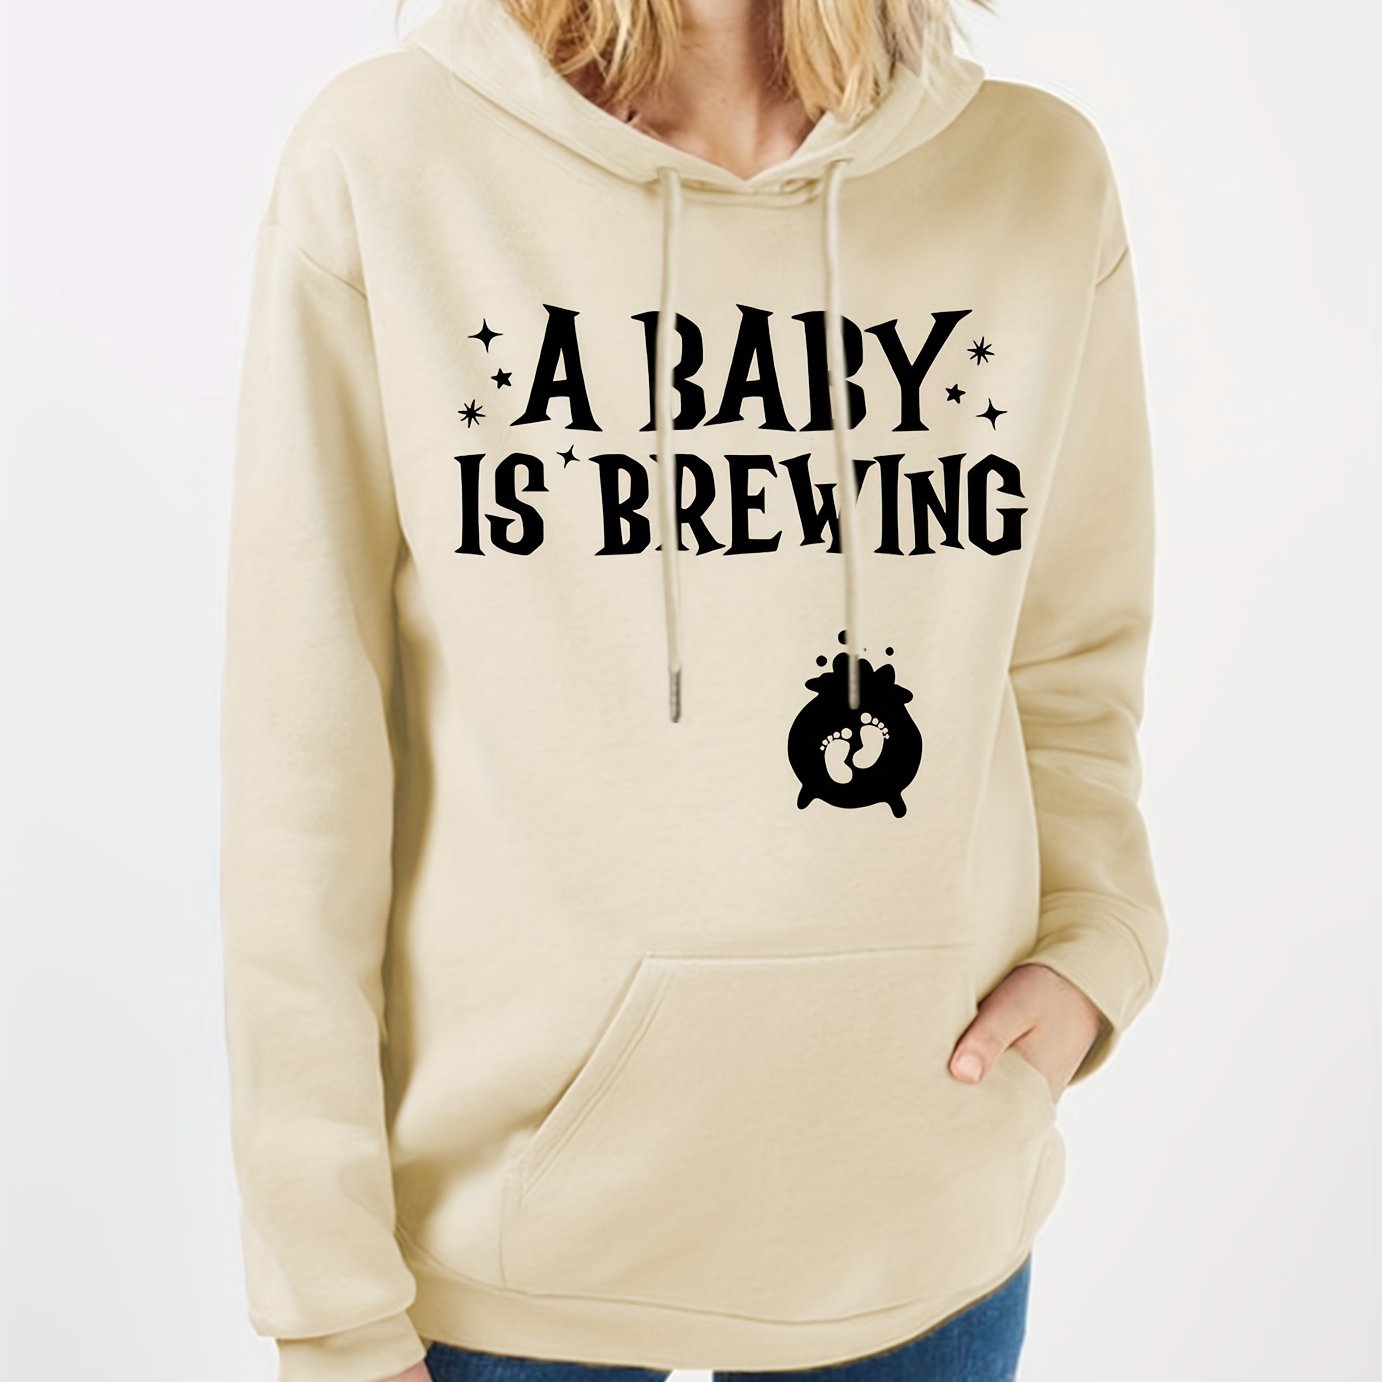 A BABY IS BREWING Women's Christian Maternity Pullover Hooded Sweatshirt claimedbygoddesigns